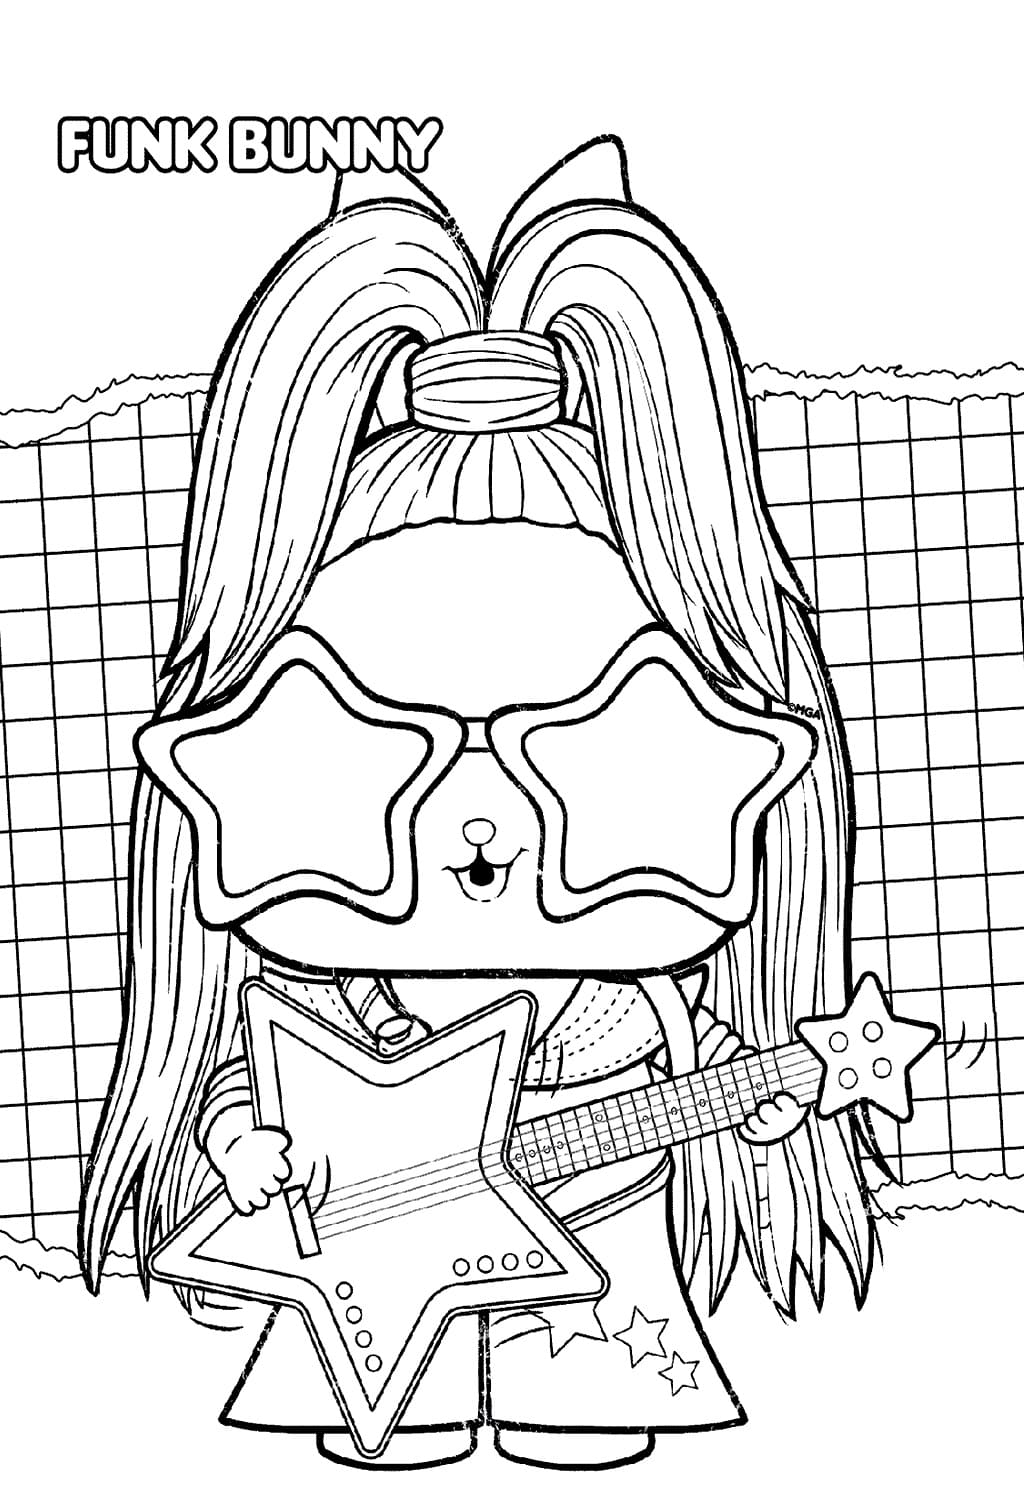 Funk Bunny LOL Surprise coloring page